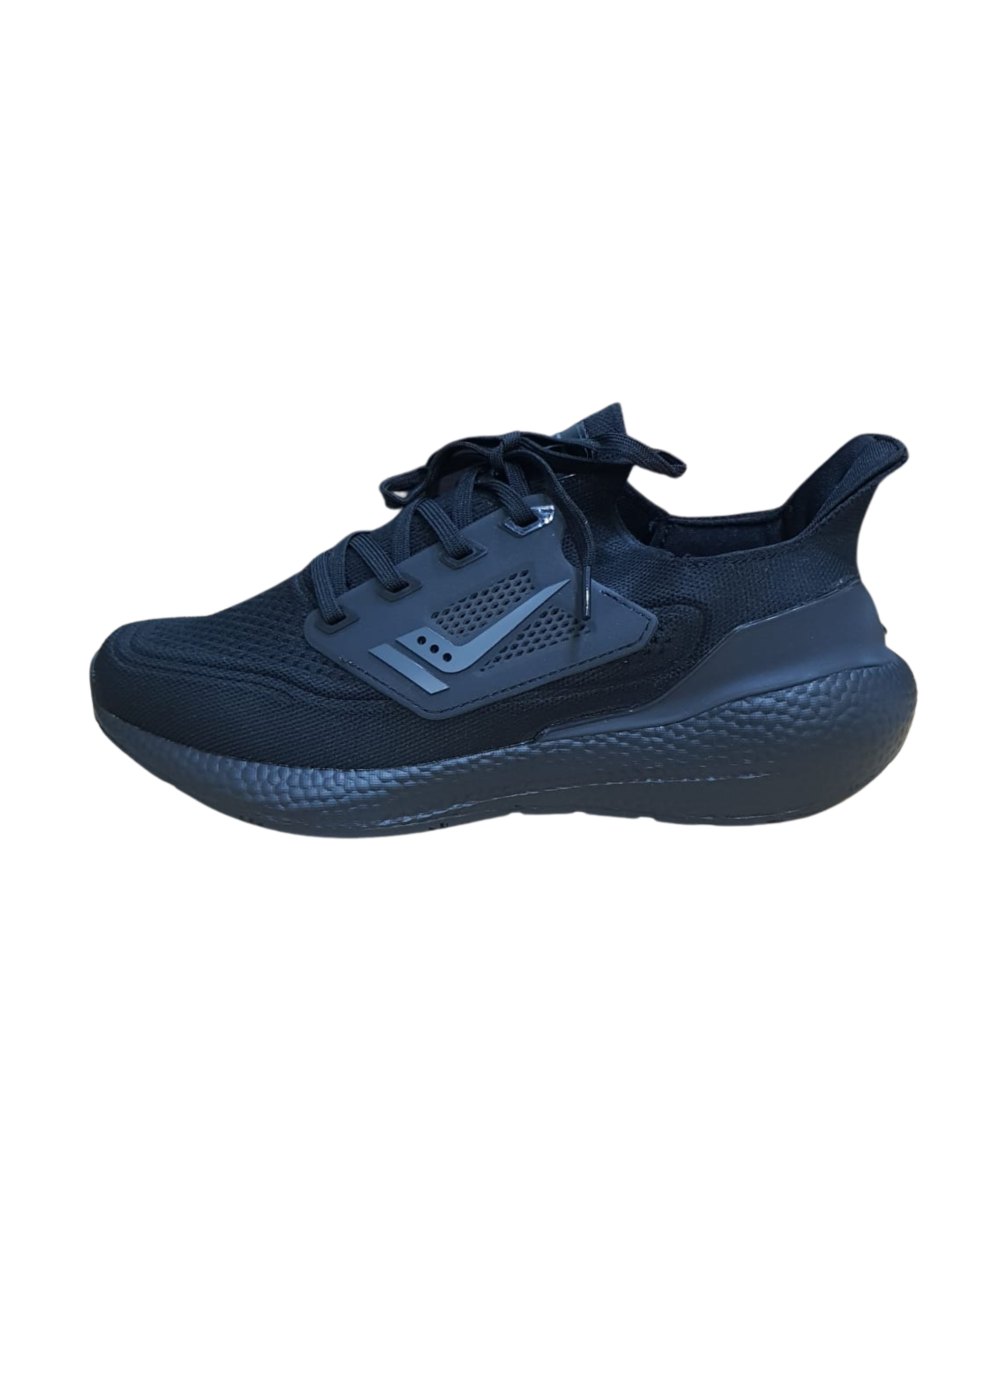 CLT Stylish Sneakers Shoes For Men